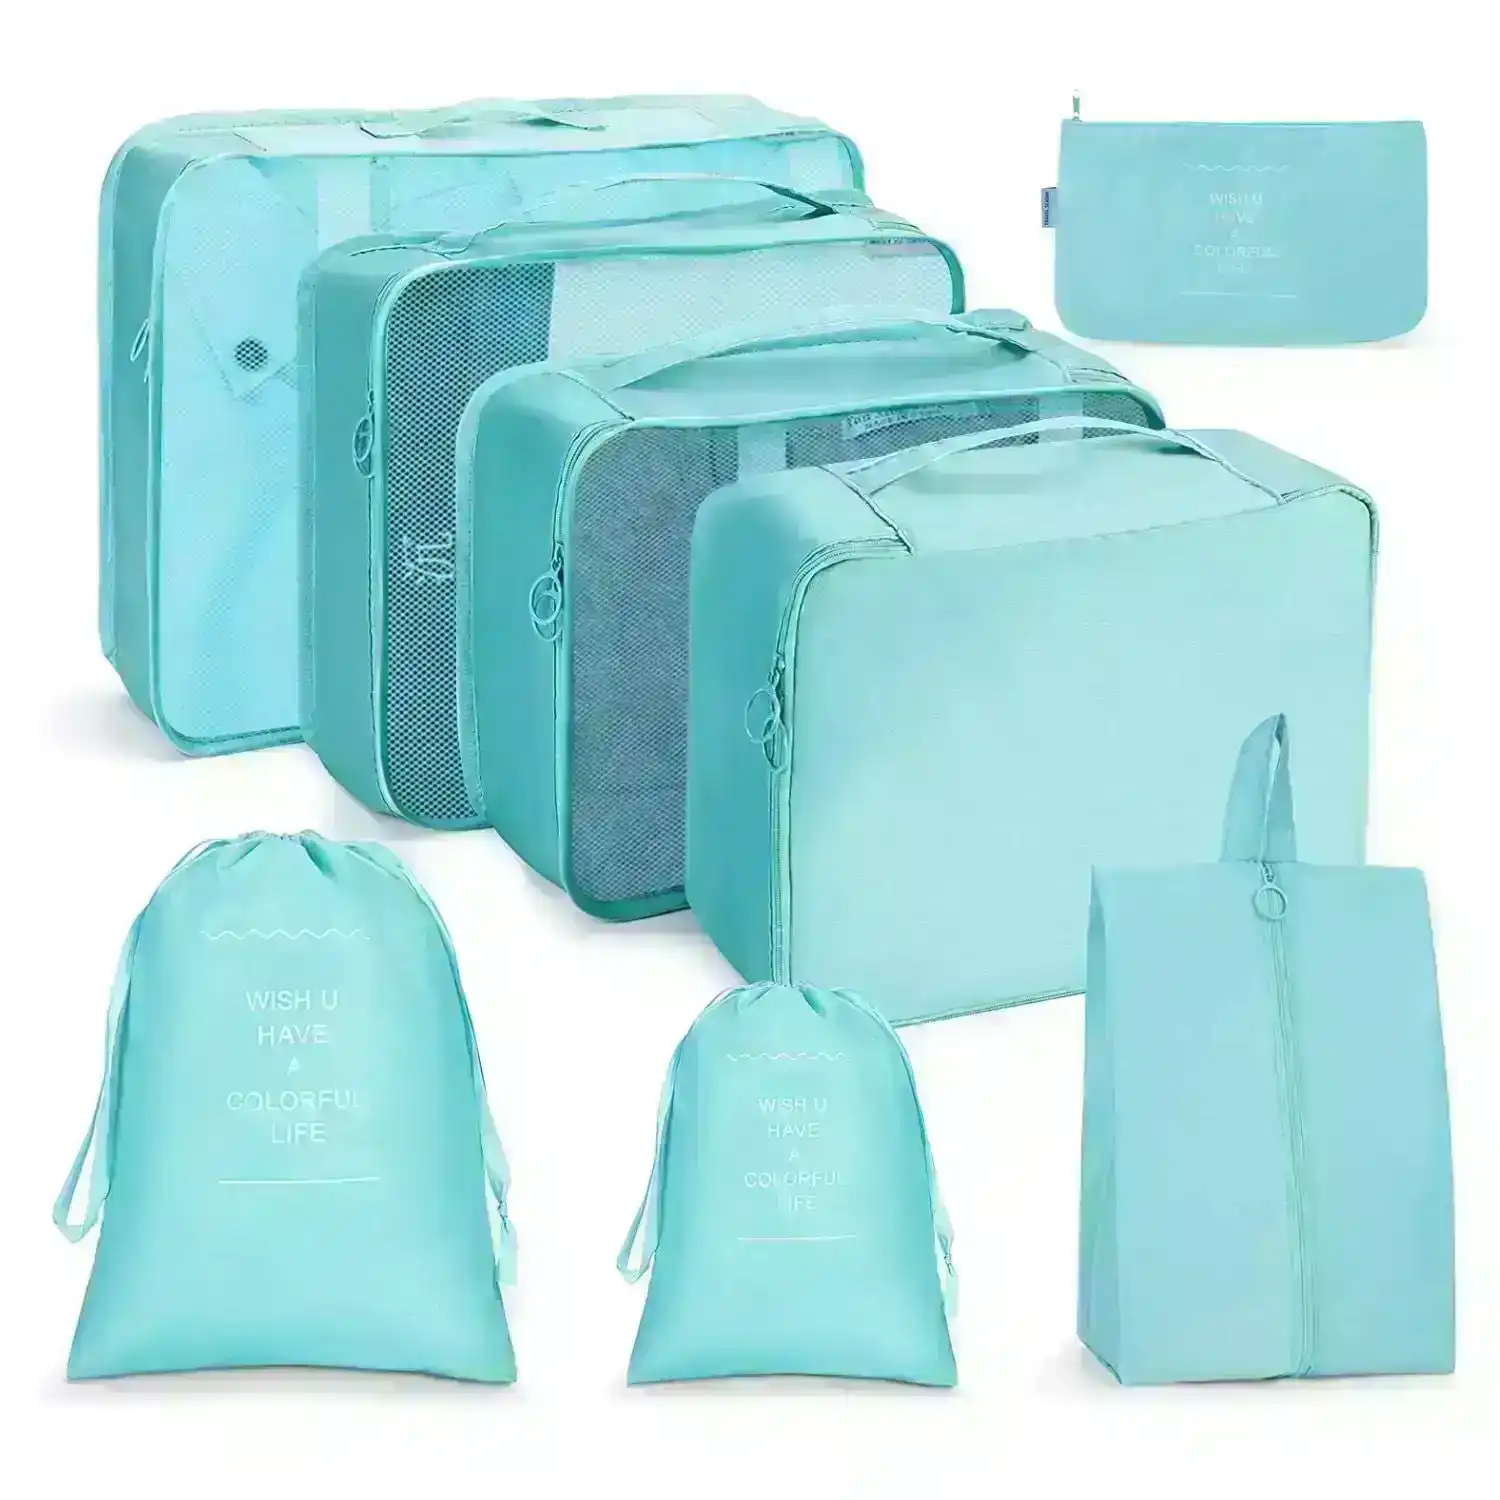 Gominimo 8 Set Packing Cubes Travel Pouches Luggage Organizer Tiffany Blue